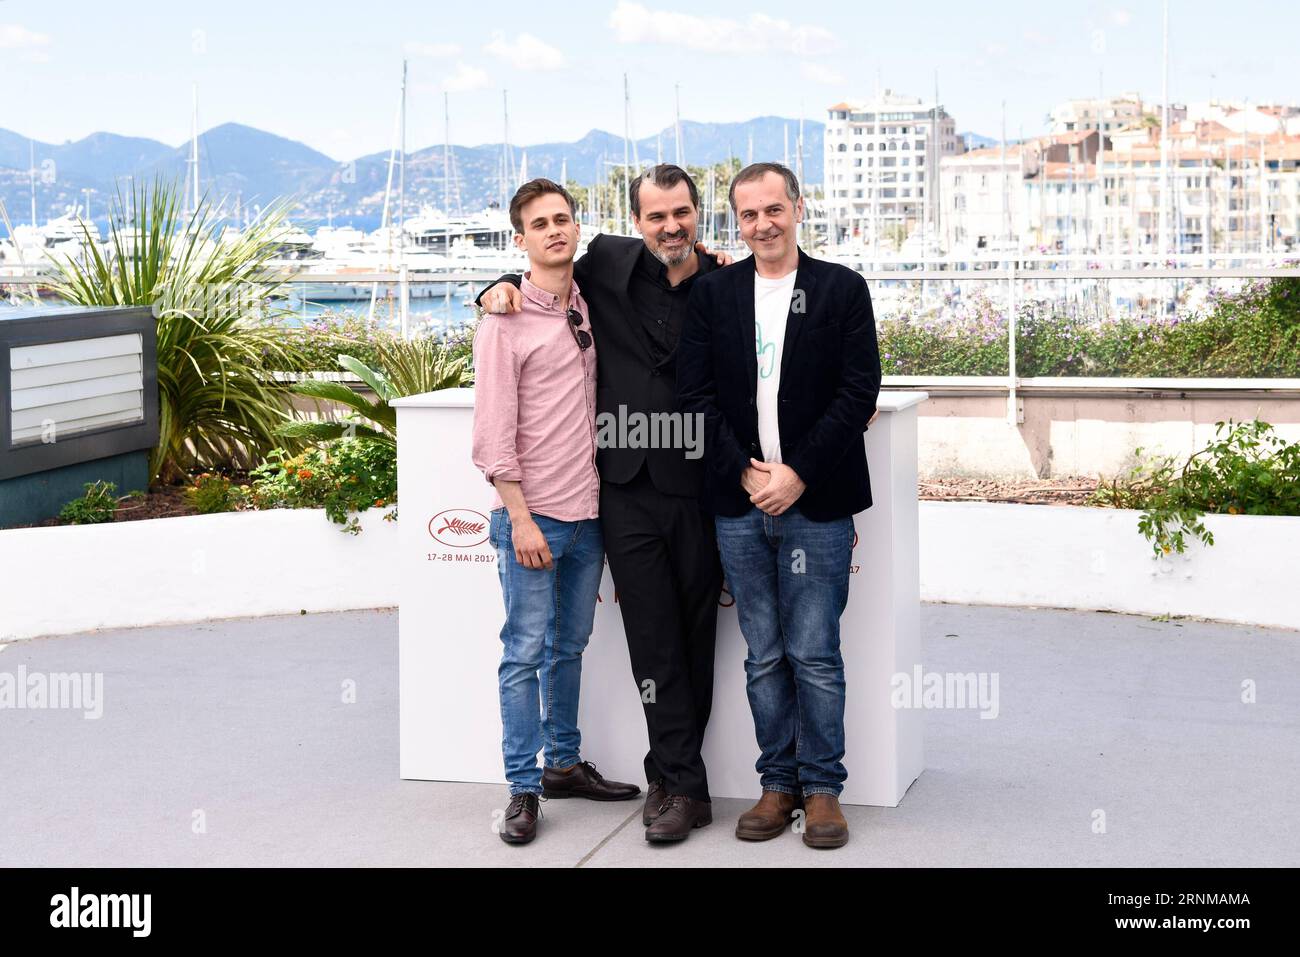 (170519) -- CANNES, May 19, 2017 -- Actor Zsombor Jeger, director Kornel Mundruczo and actor Merab Ninidze (from L to R) of the film Jupiter s Moon pose for a photocall in Cannes, France, on May 19, 2017. The film Jupiter s Moon directed by Hungarian director Kornel Mundruczo will compete for the Palme d Or on the 70th Cannes Film Festival. )(gl) FRANCE-CANNES-70TH CANNES FILM FESTIVAL-IN COMPETITION-JUPITER S MOON-PHOTOCALL ChenxYichen PUBLICATIONxNOTxINxCHN   Cannes May 19 2017 Actor  Jeger Director Kornel Mundruczo and Actor Merab Ninidze from l to r of The Film Jupiter S Moon Pose for a ph Stock Photo